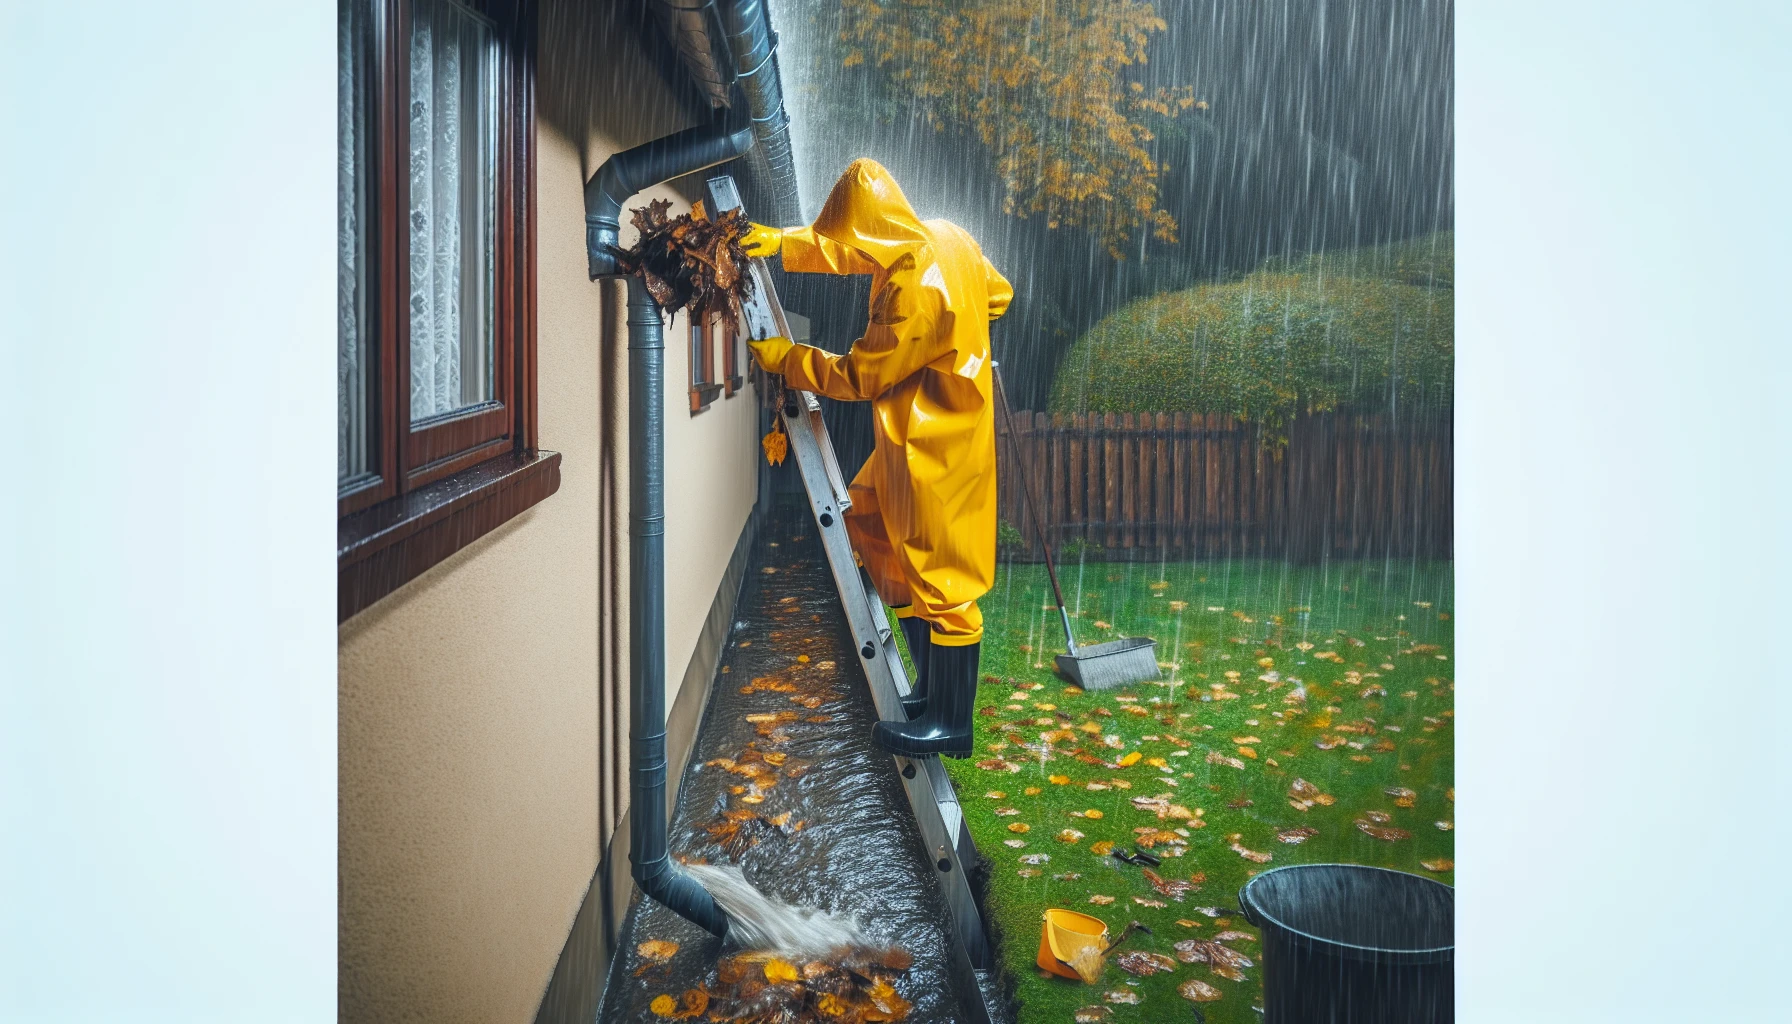 Removing large debris from gutters in the rain